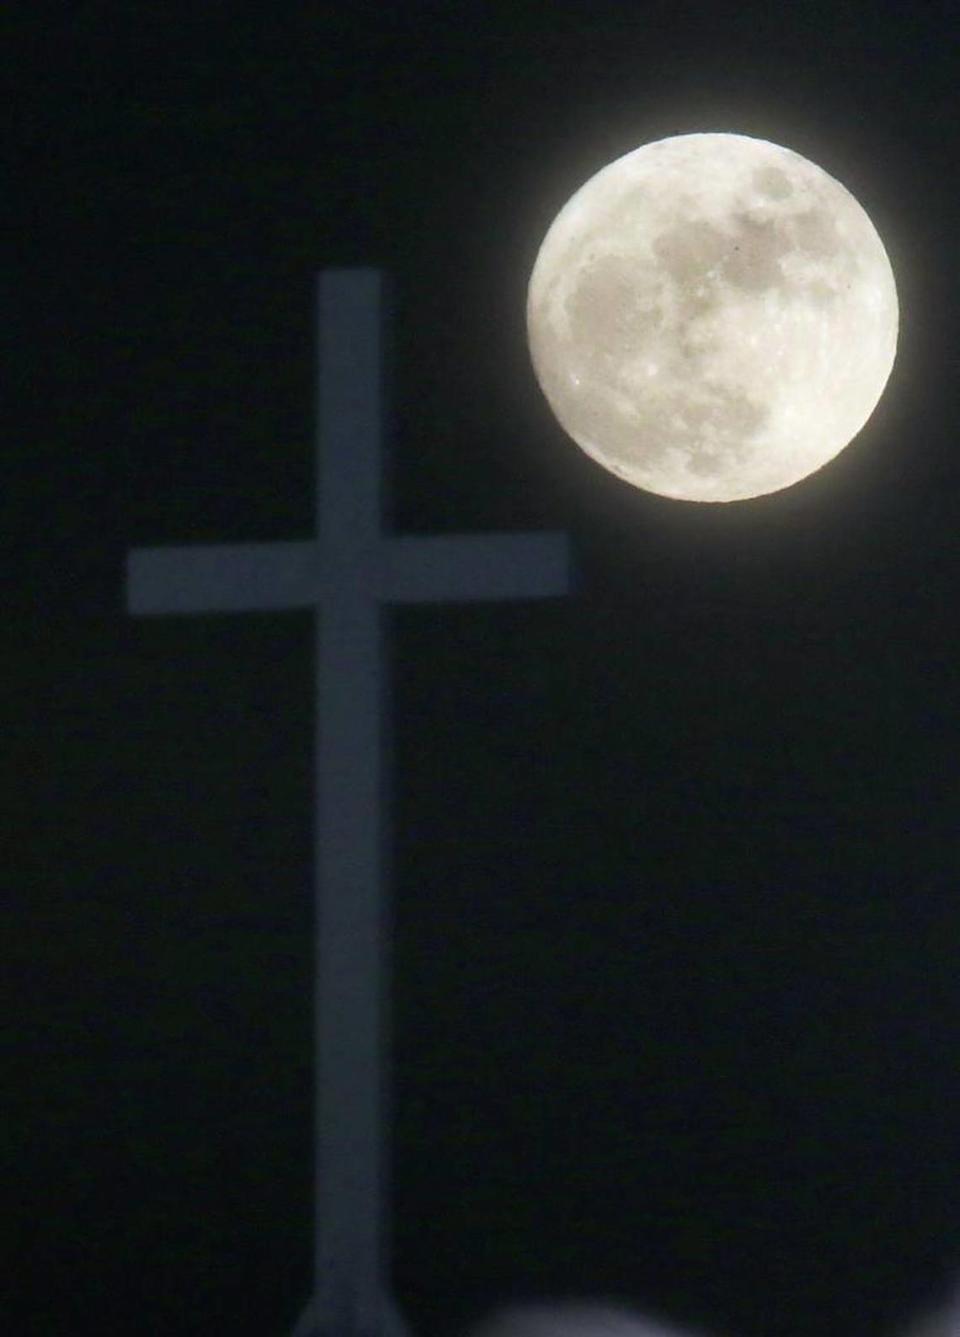 The Long Night Moon rises behind a cross at Christ Community Church in Lawrence, Kan., Thursday, Dec. 24, 2015. When the moon turns full, at 5:11am cst., it will be the first full moon to fall on Christmas day since 1977. Named the Long Night Moon because it’s the first full moon to follow the winter solstice, it’s also known as the Cold Moon.